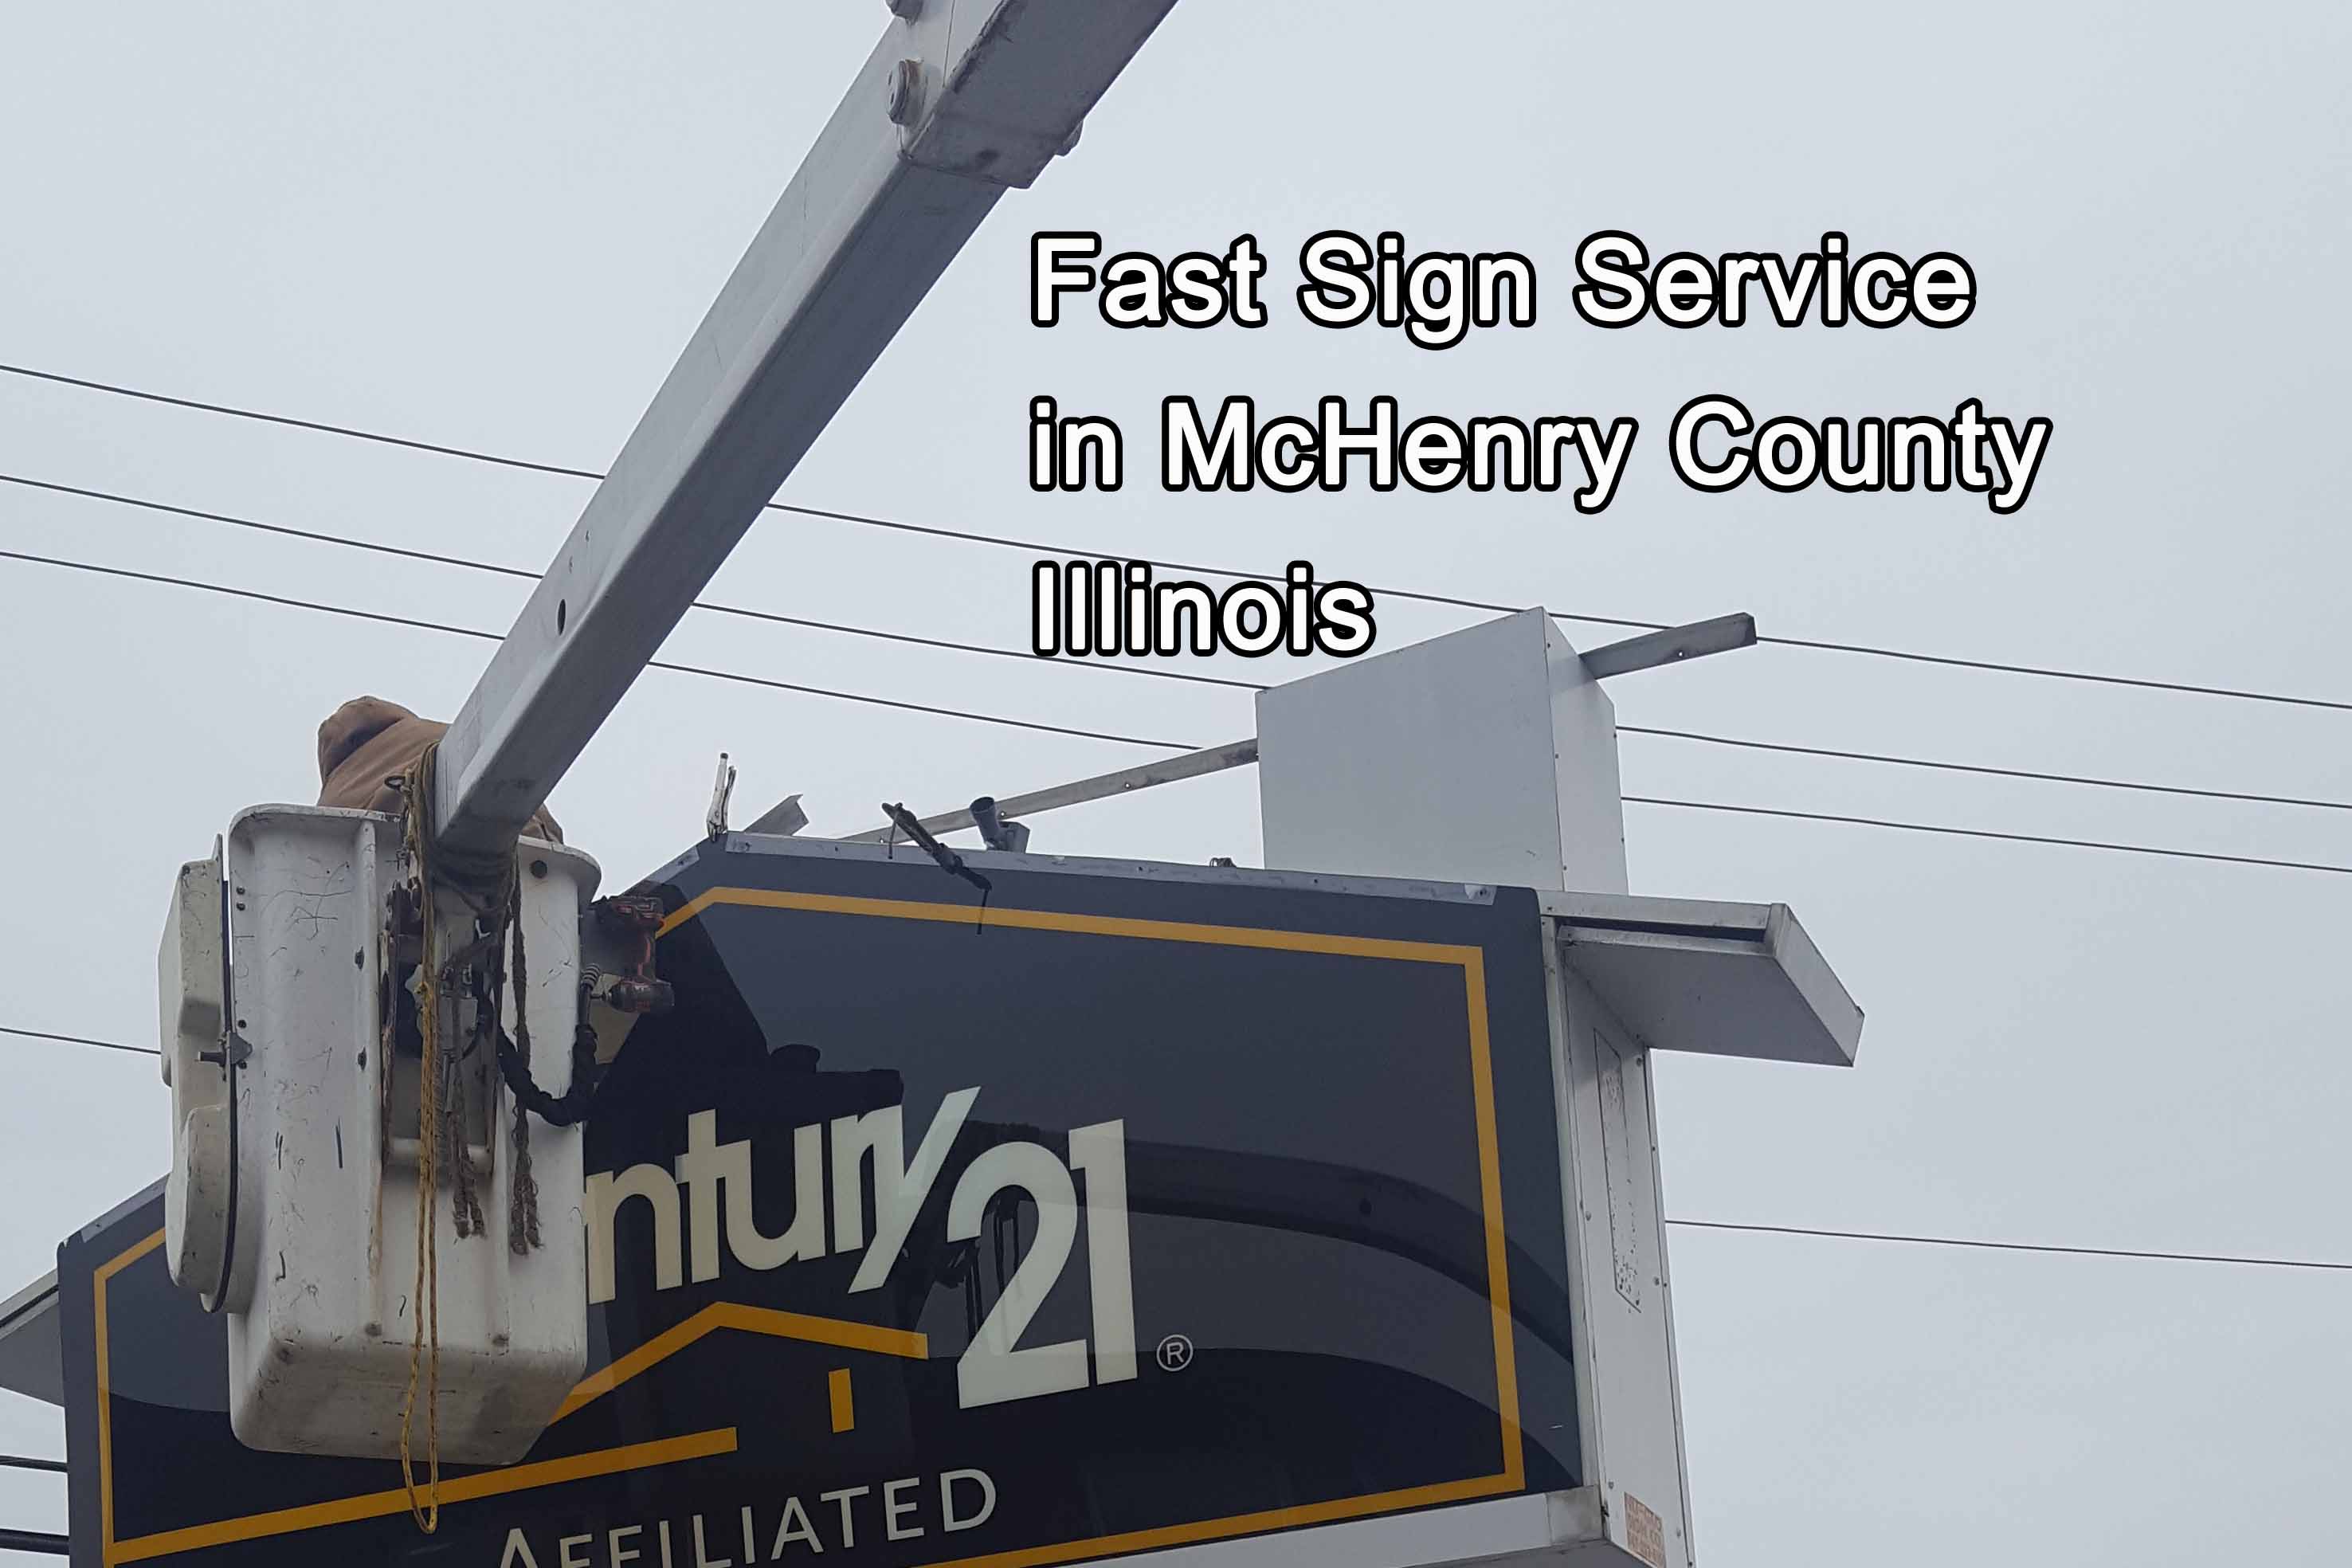 Sign Service in McHenry County Illinois